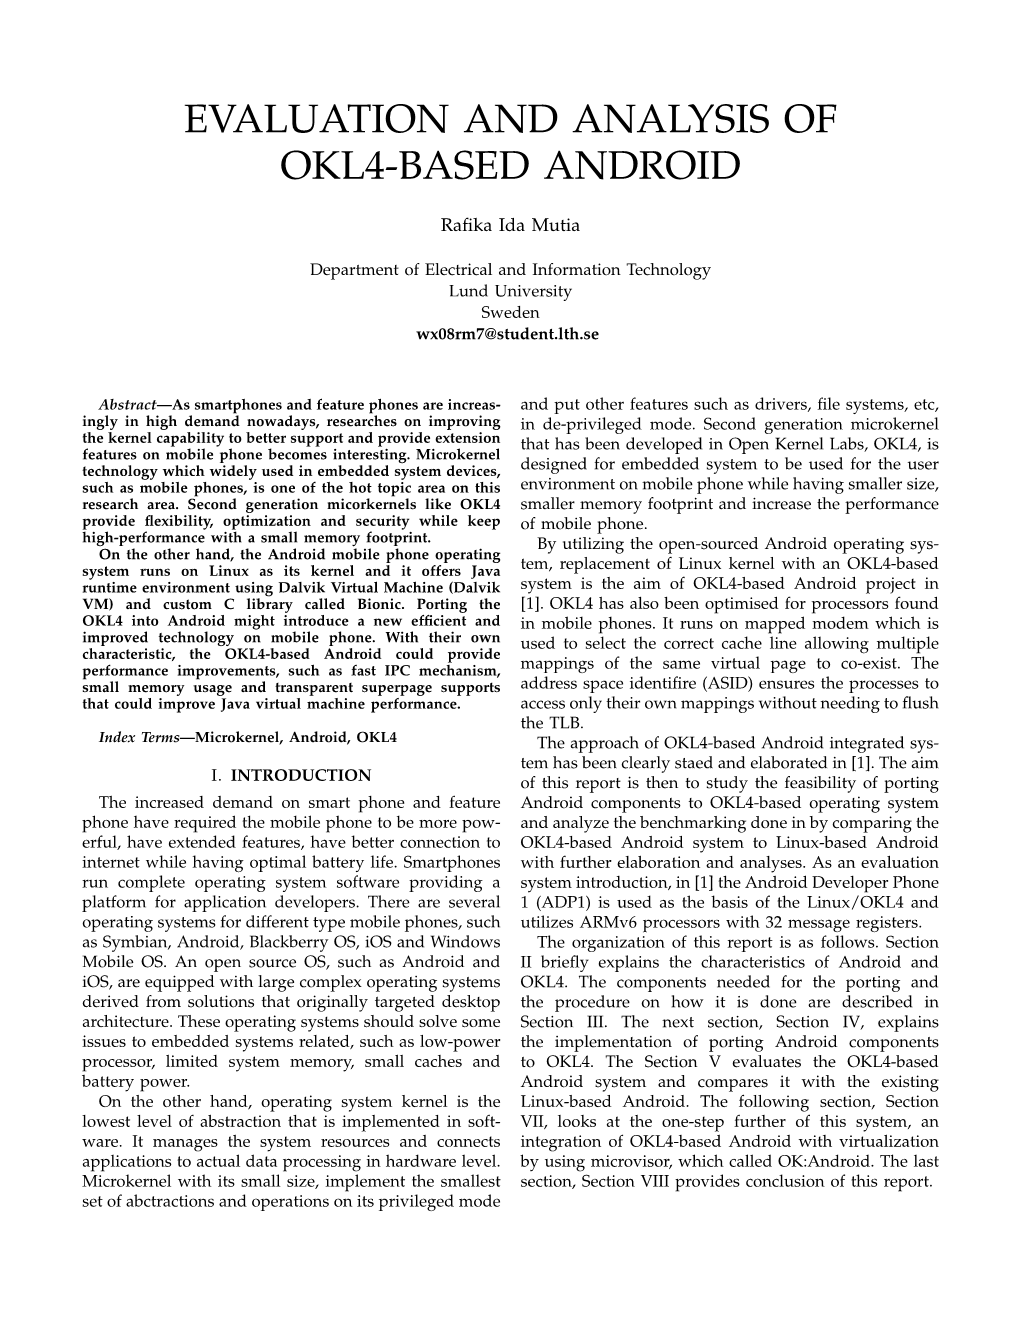 Evaluation and Analysis of Okl4-Based Android